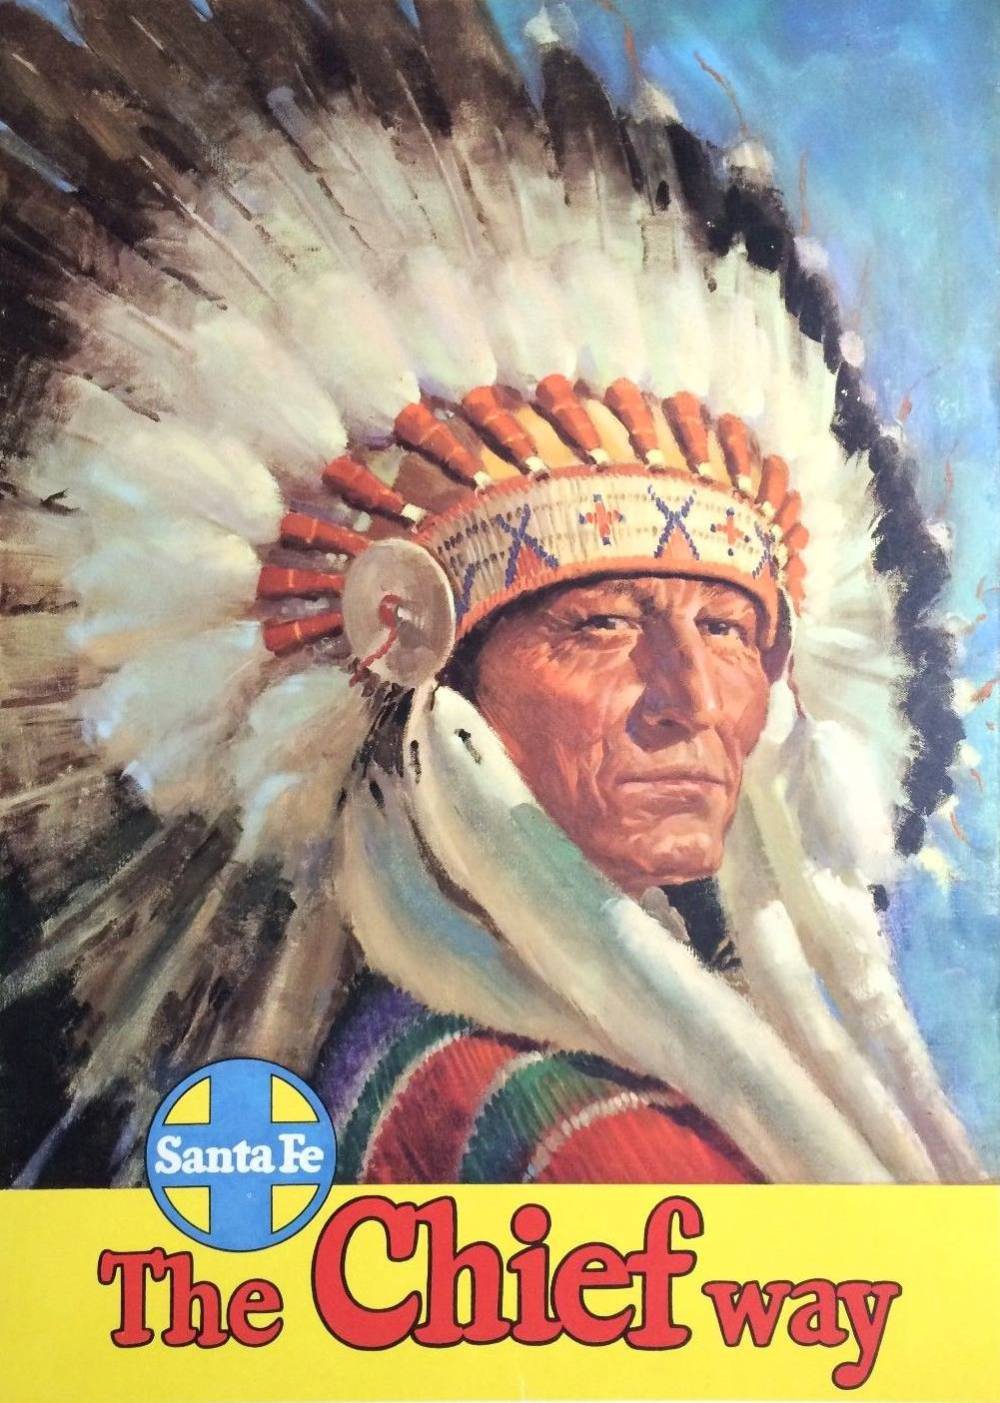 POSTER - CHICAGO - SANTA FE RAILROAD - THE CHIEF WAY - DRAMATIC PAINTING OF INDIAN CHIEF - c1950s